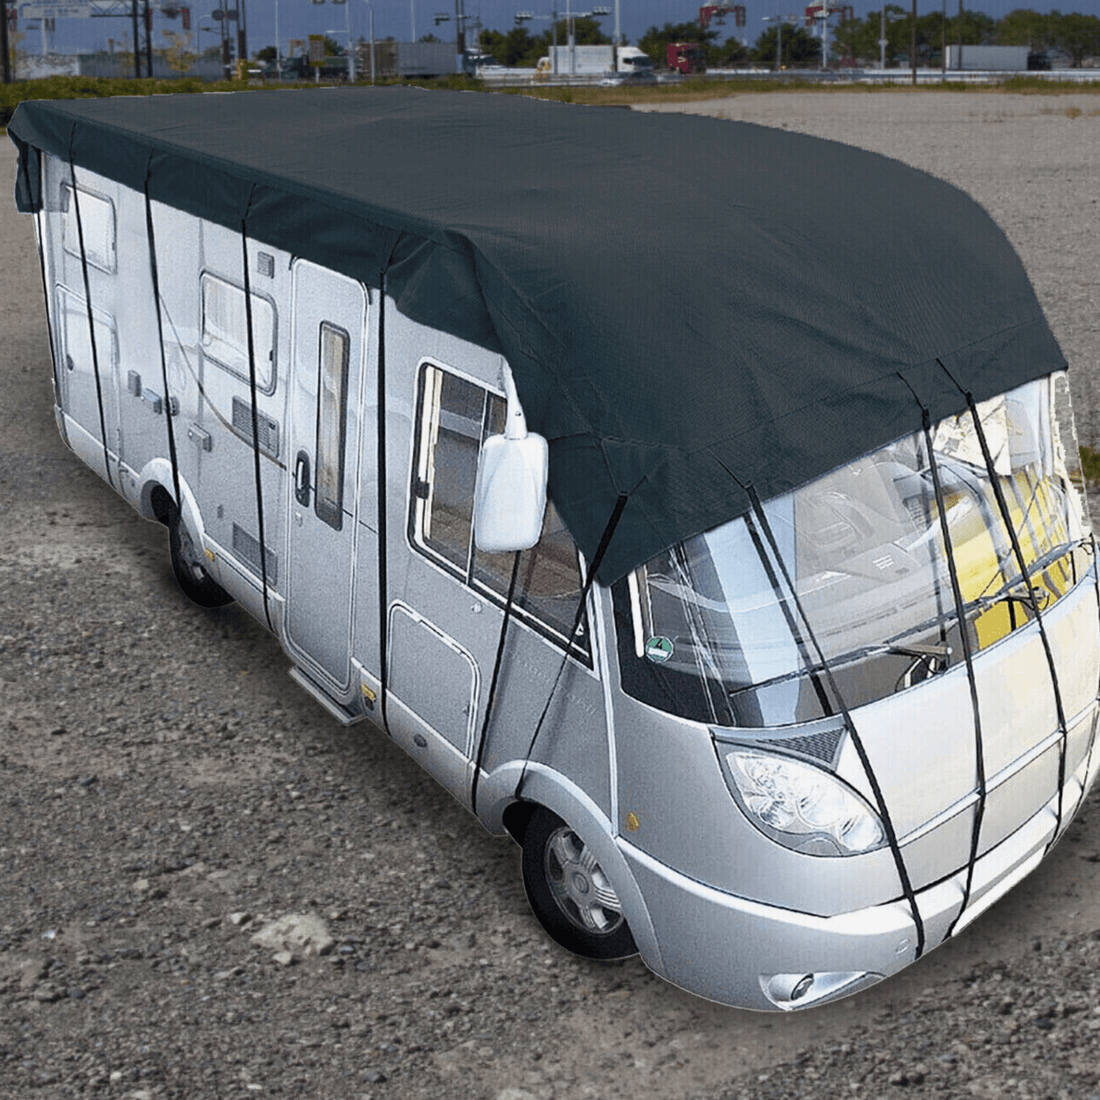 All-Weather Guard RV Cover - Horti Cubic